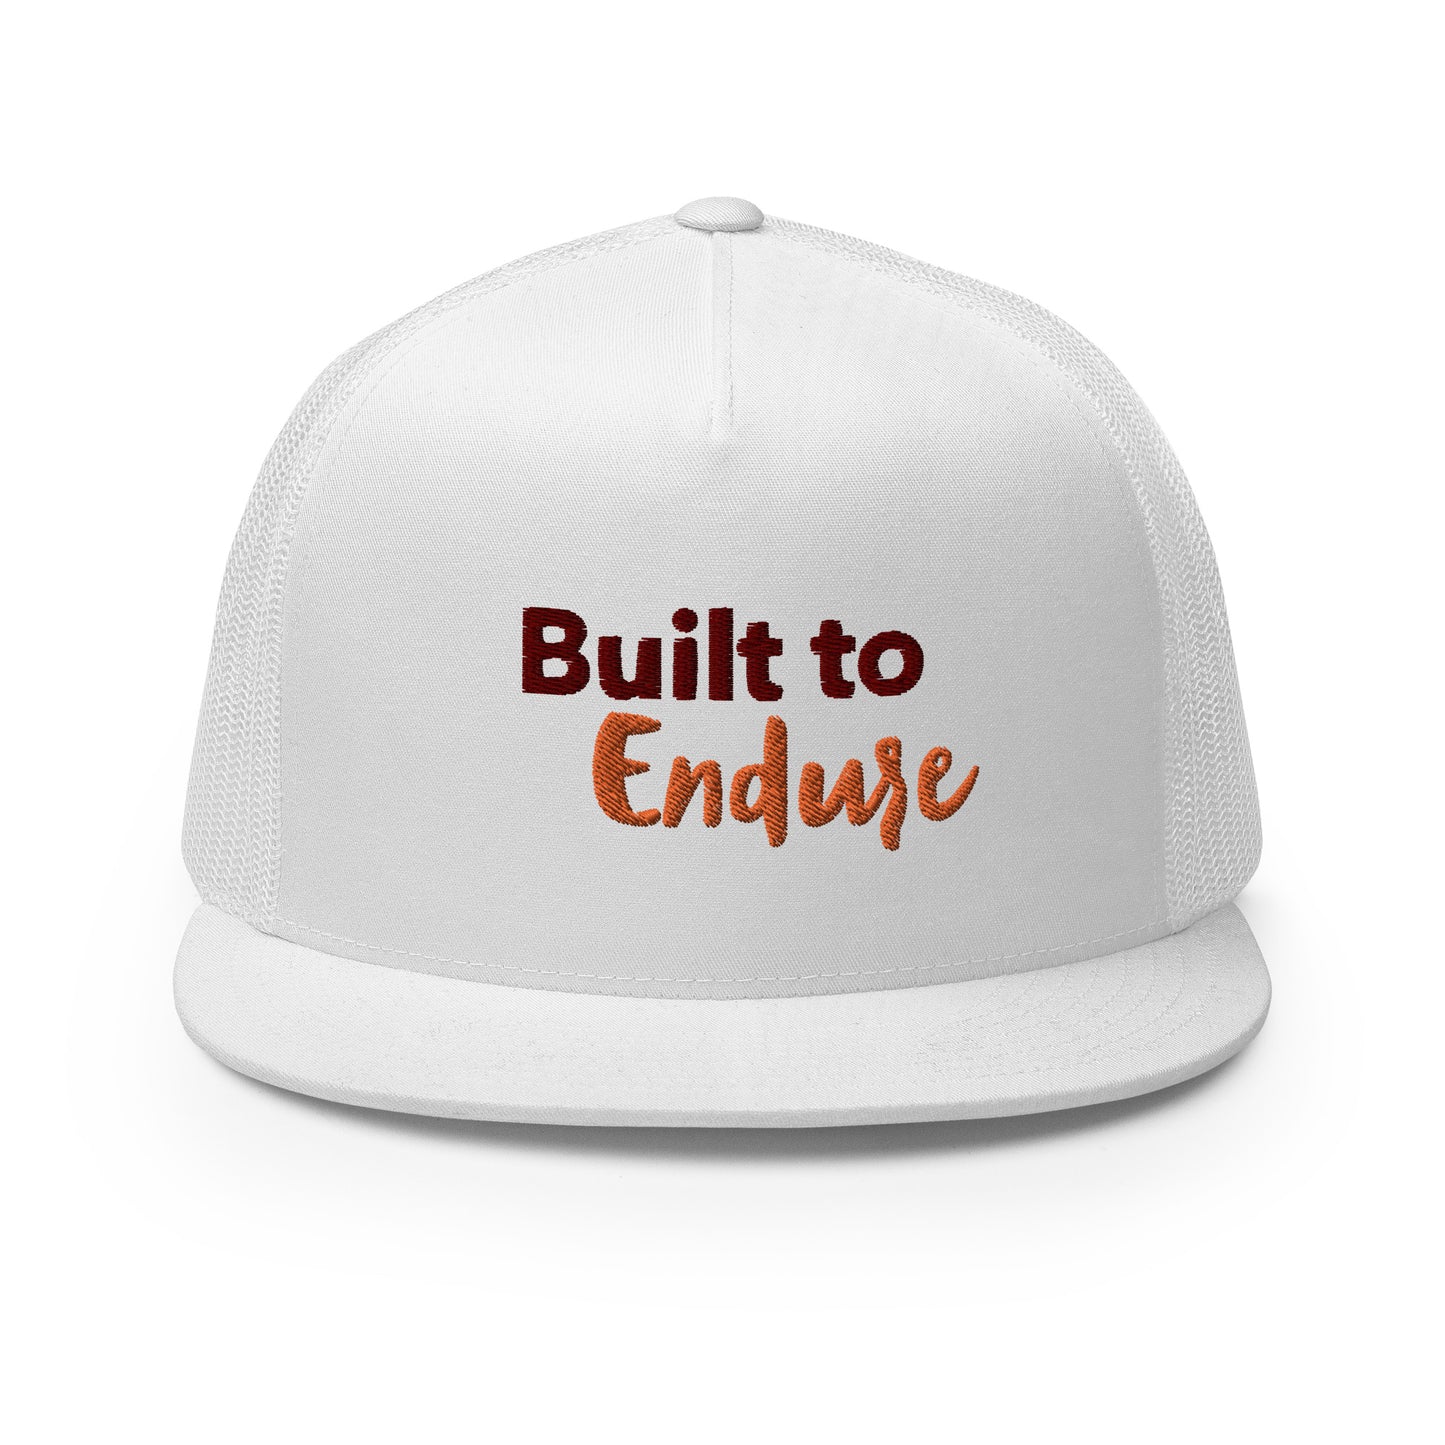 Built to Endure - Embroidered Trucker Hat